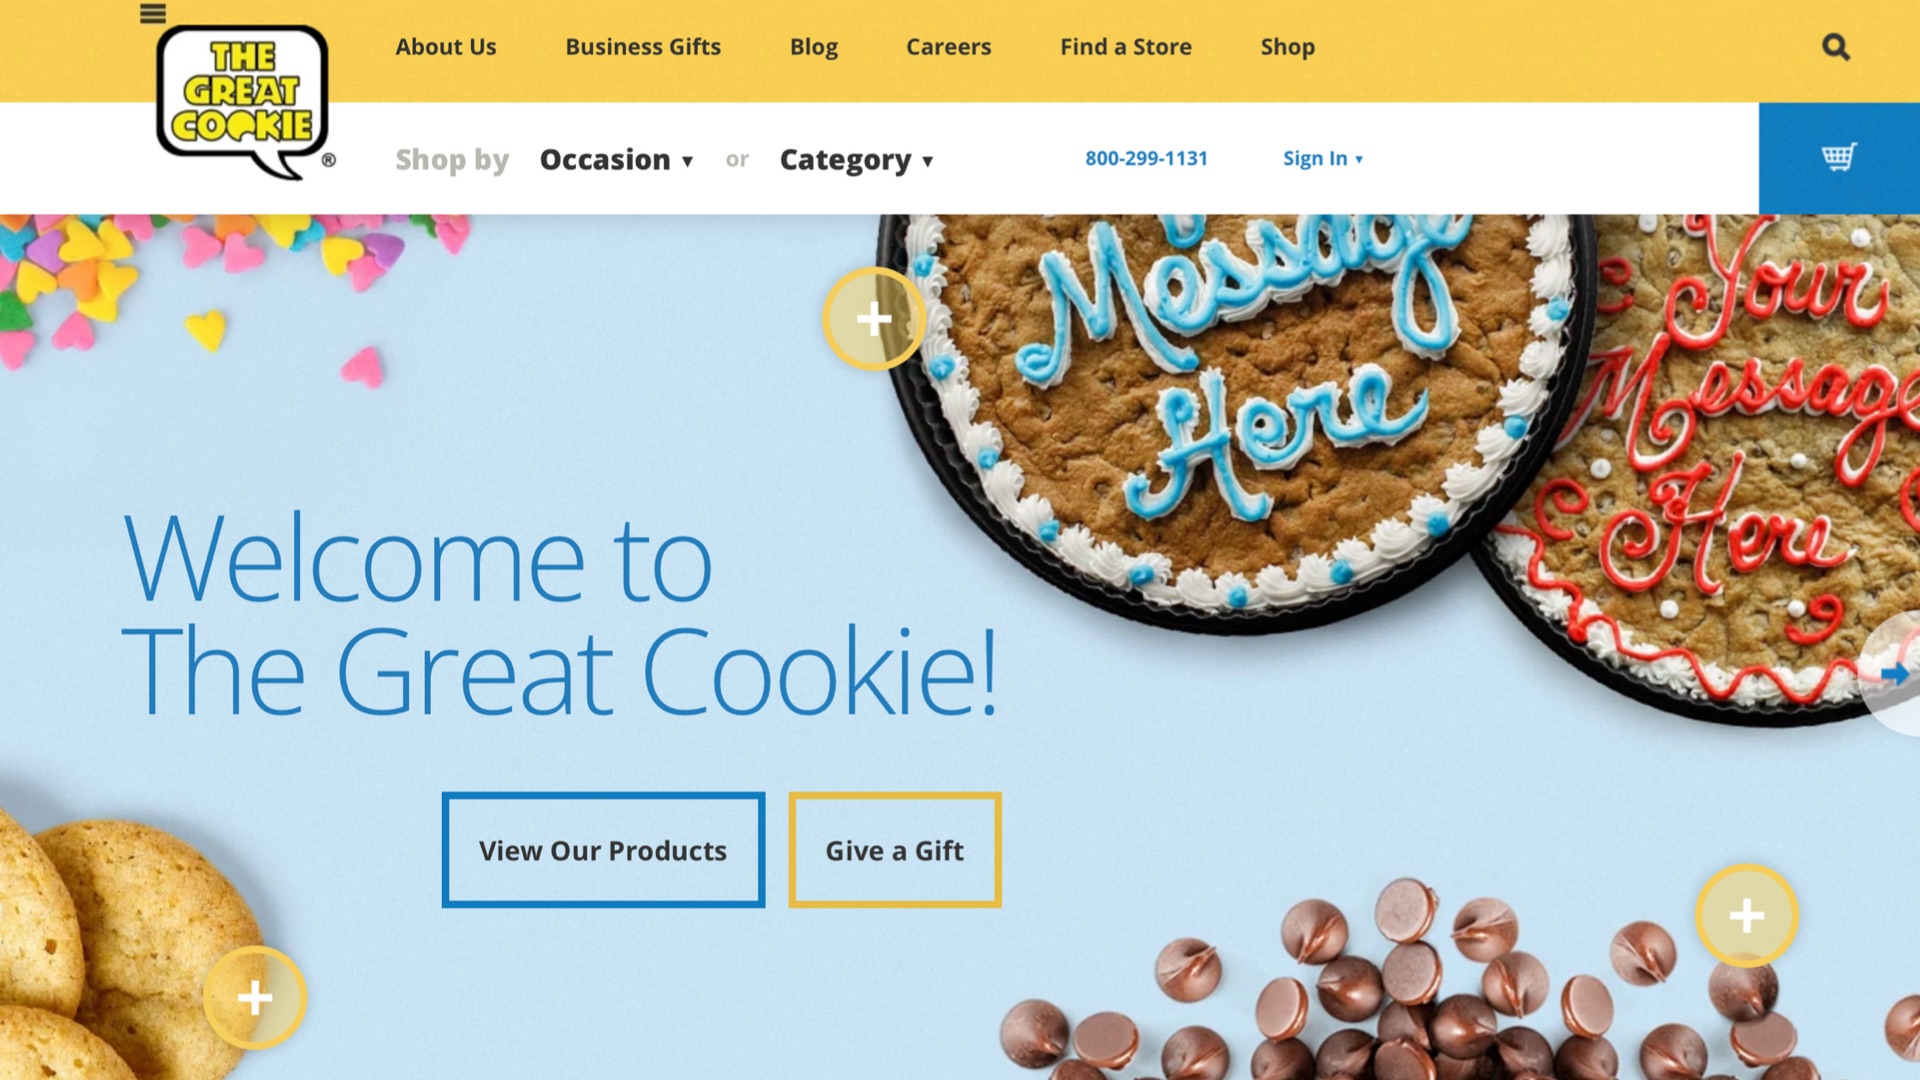 Home page of The Great Cookie